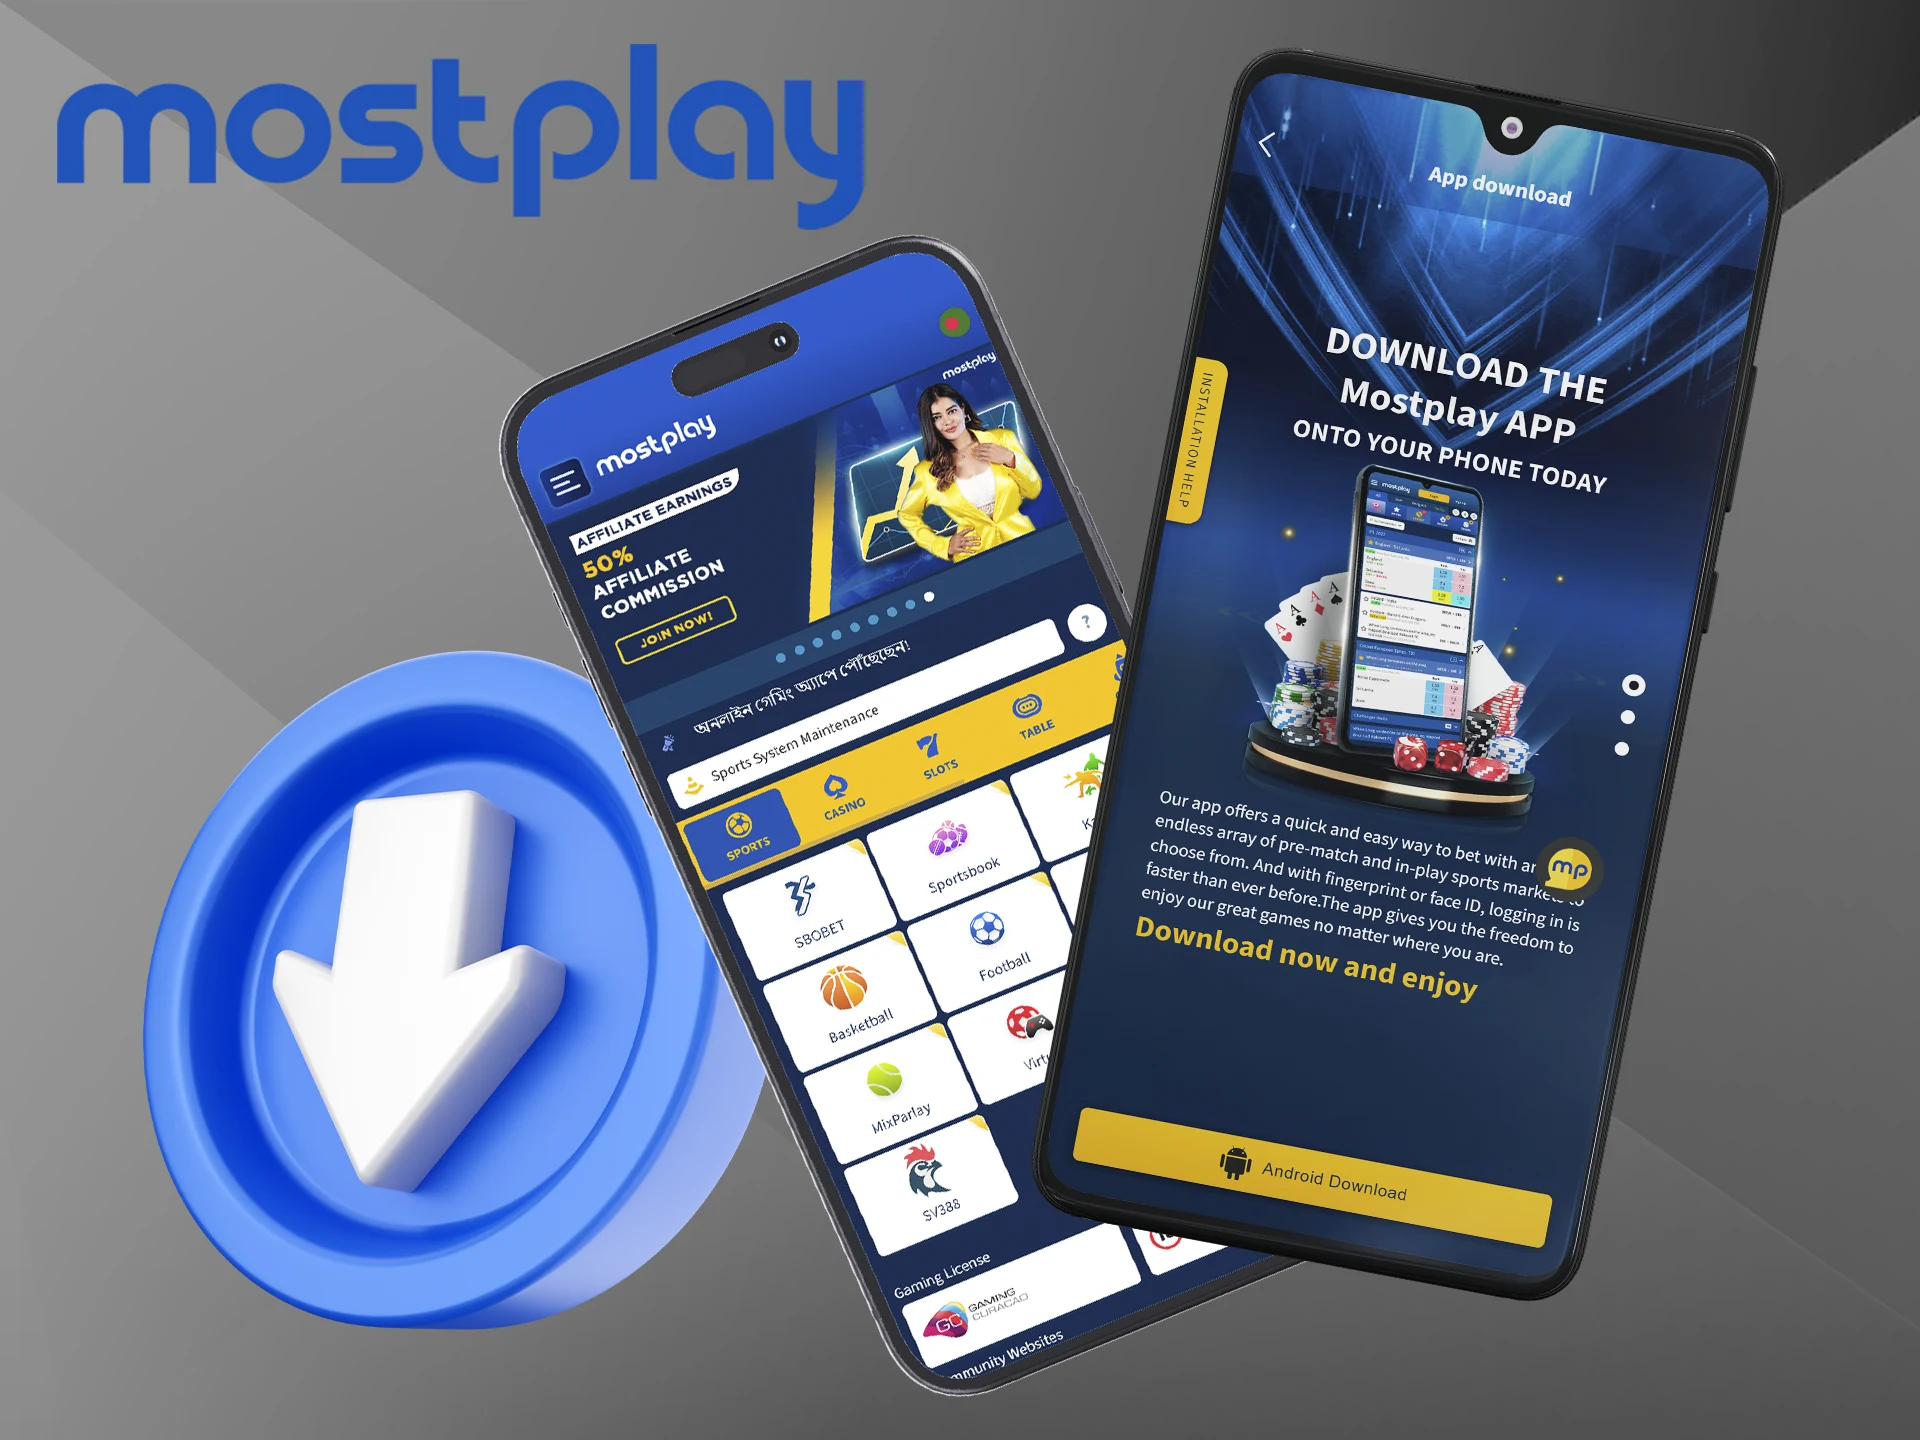 Install the Mostplay mobile app in a couple of easy steps.